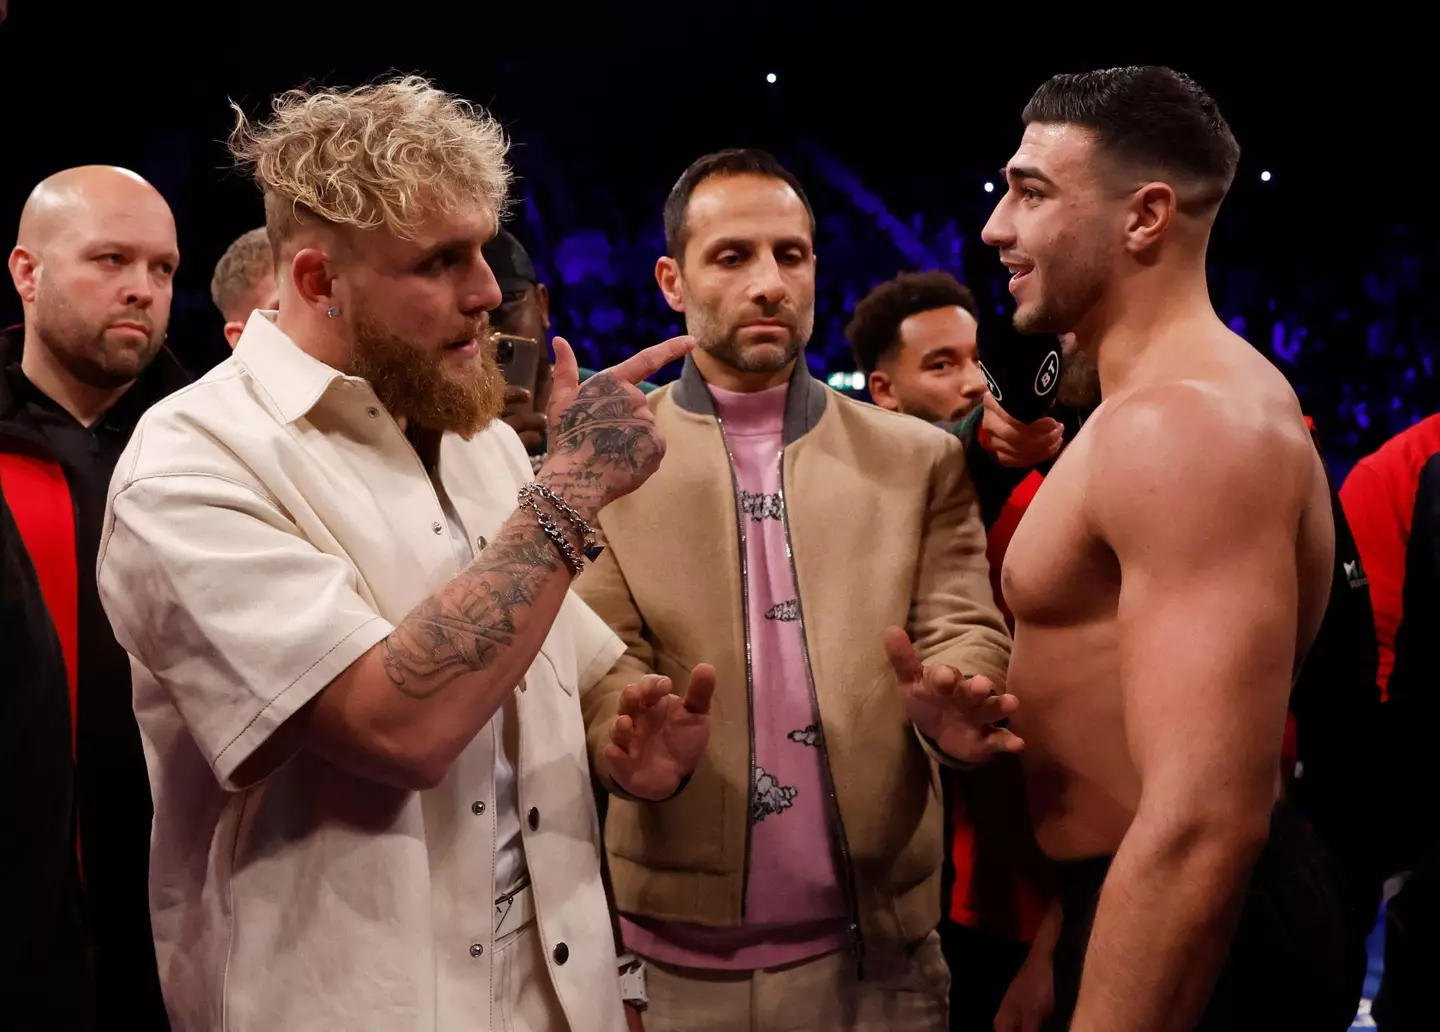 The fight between Jake Paul and Tommy Fury is finally happening.